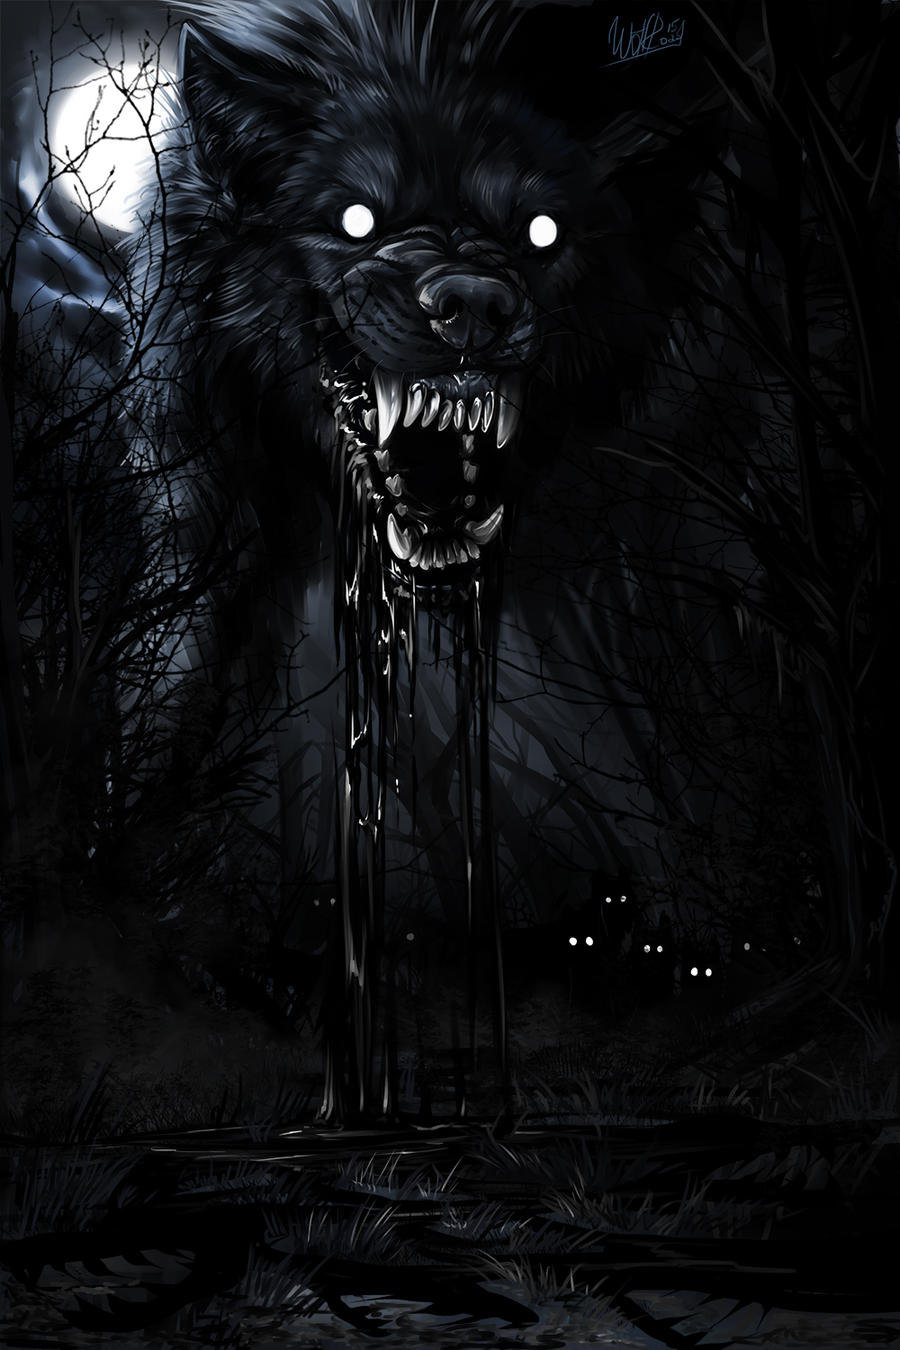 fear_by_wolfroad-d8zs6qn.jpg